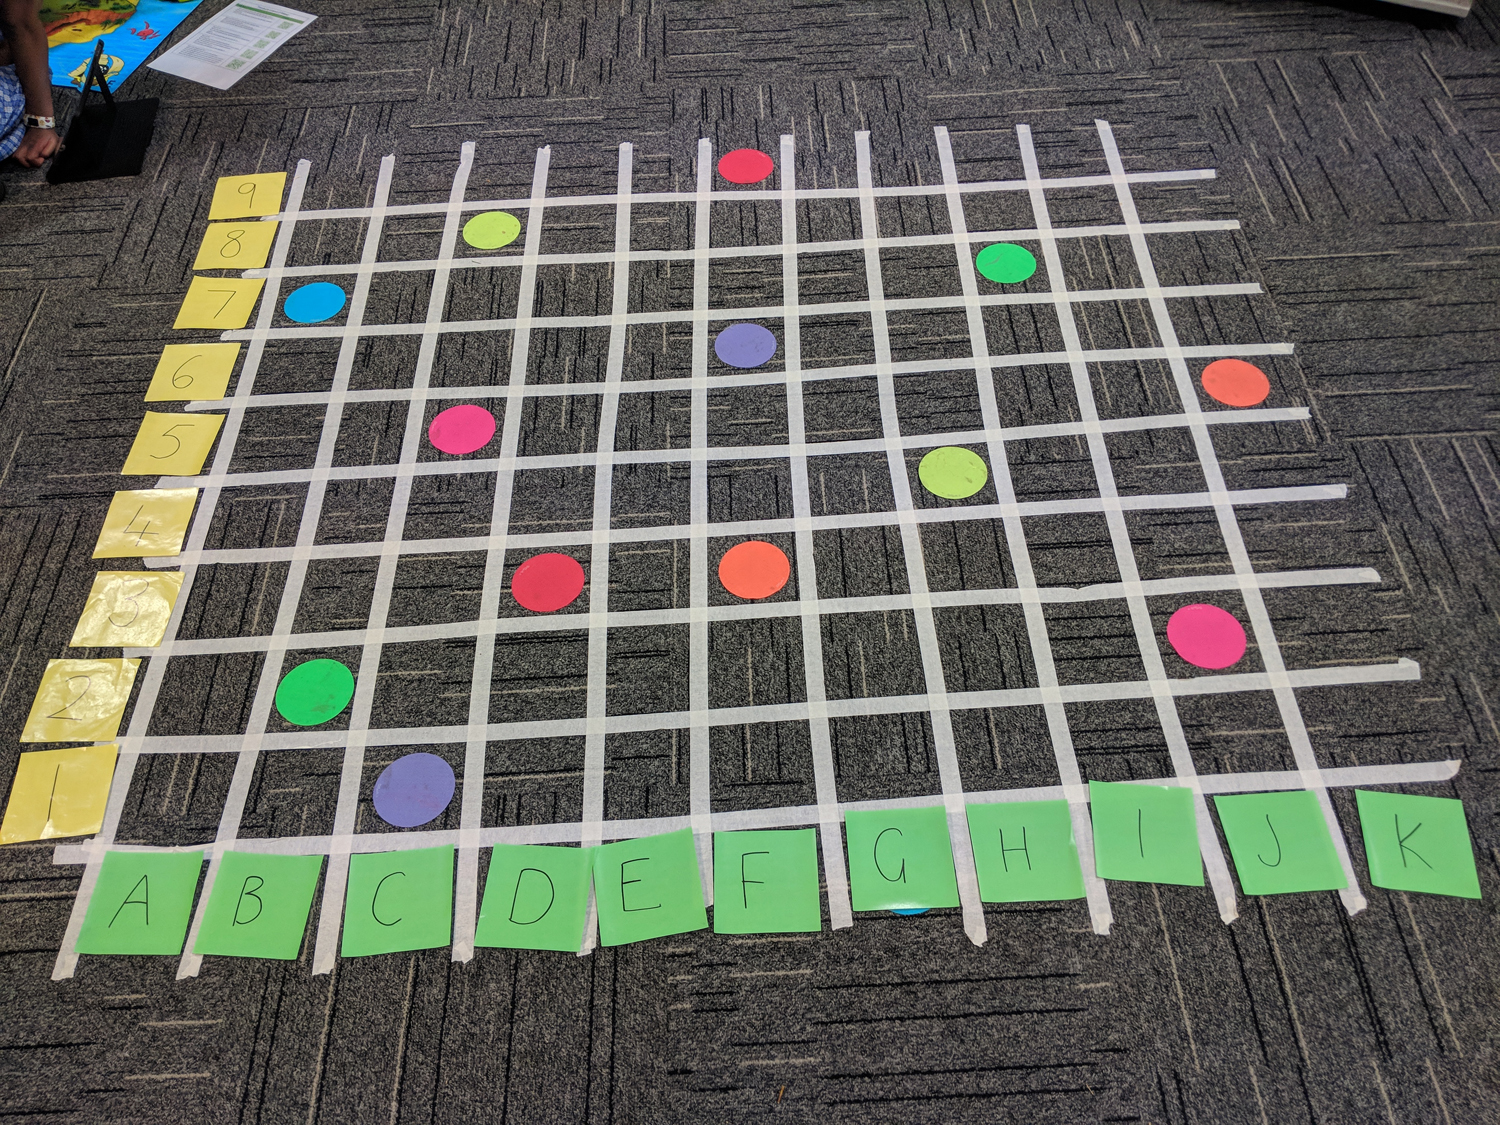 Location and coordinates grid with letters and coloured dots on floor